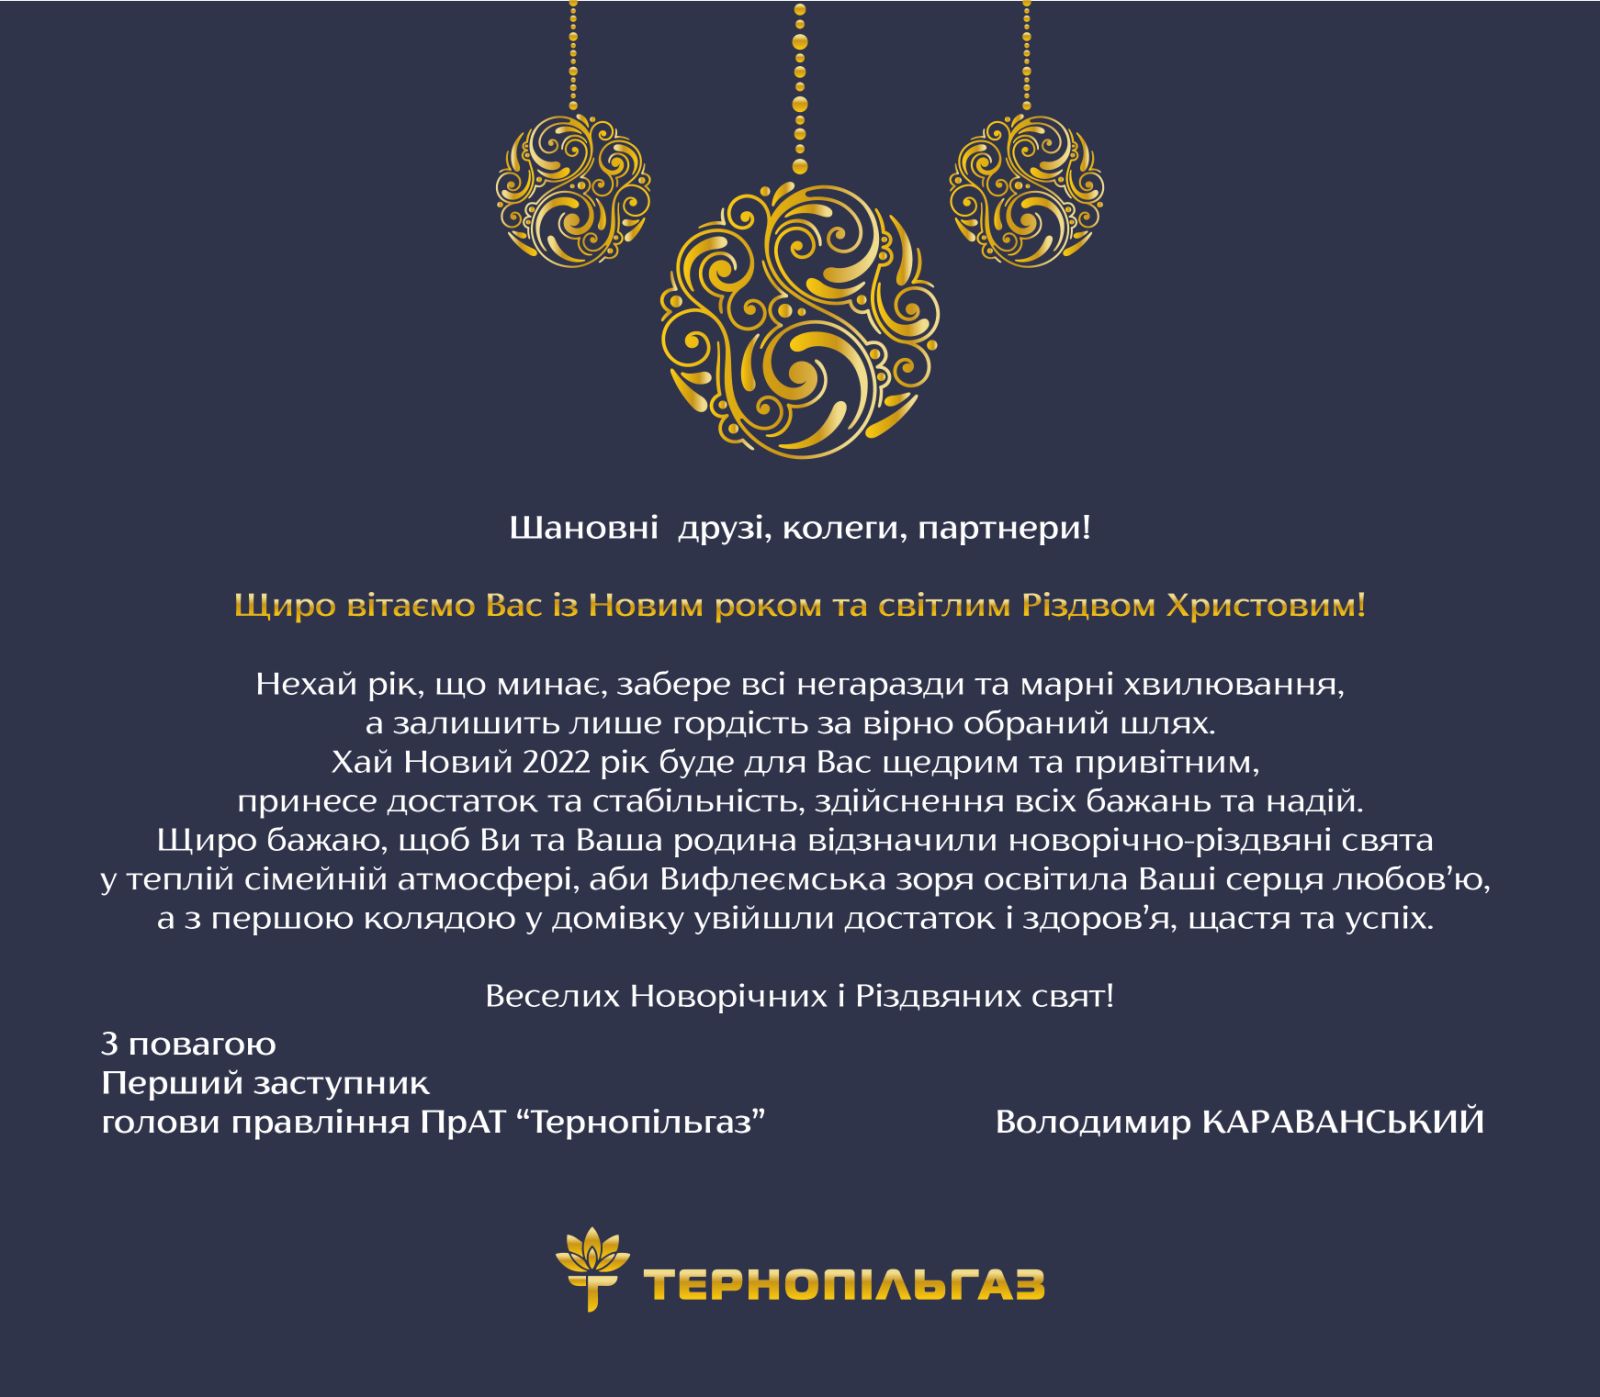 Congratulations of the First Deputy Chairman of the Board of the PrJSC “Ternopilgaz” on the New Year and Christmas Holidays 2022!